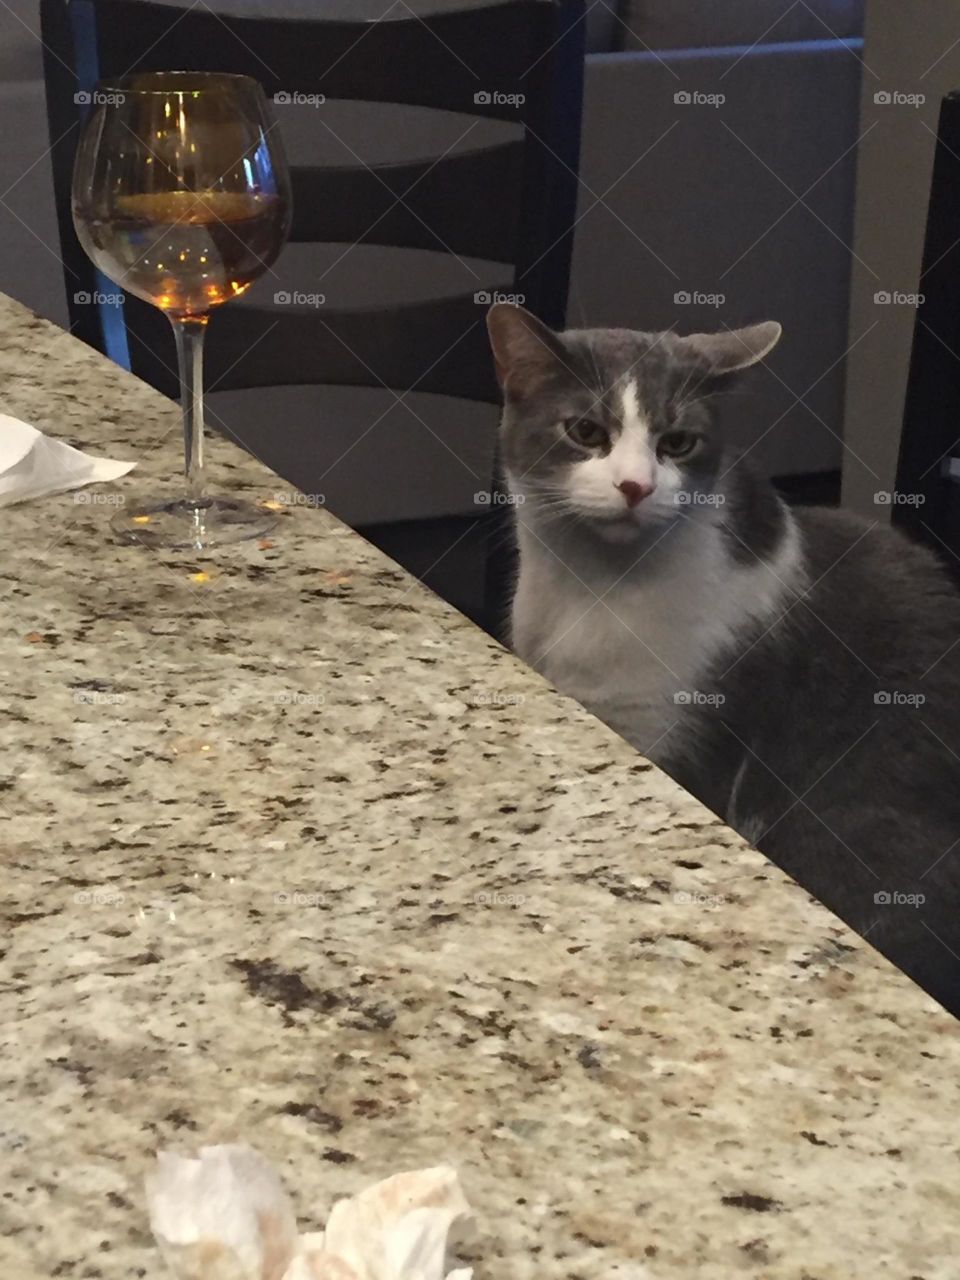 sad looking cat next to a glass of wine set on a granite countertop. the cat has a drinking problem.